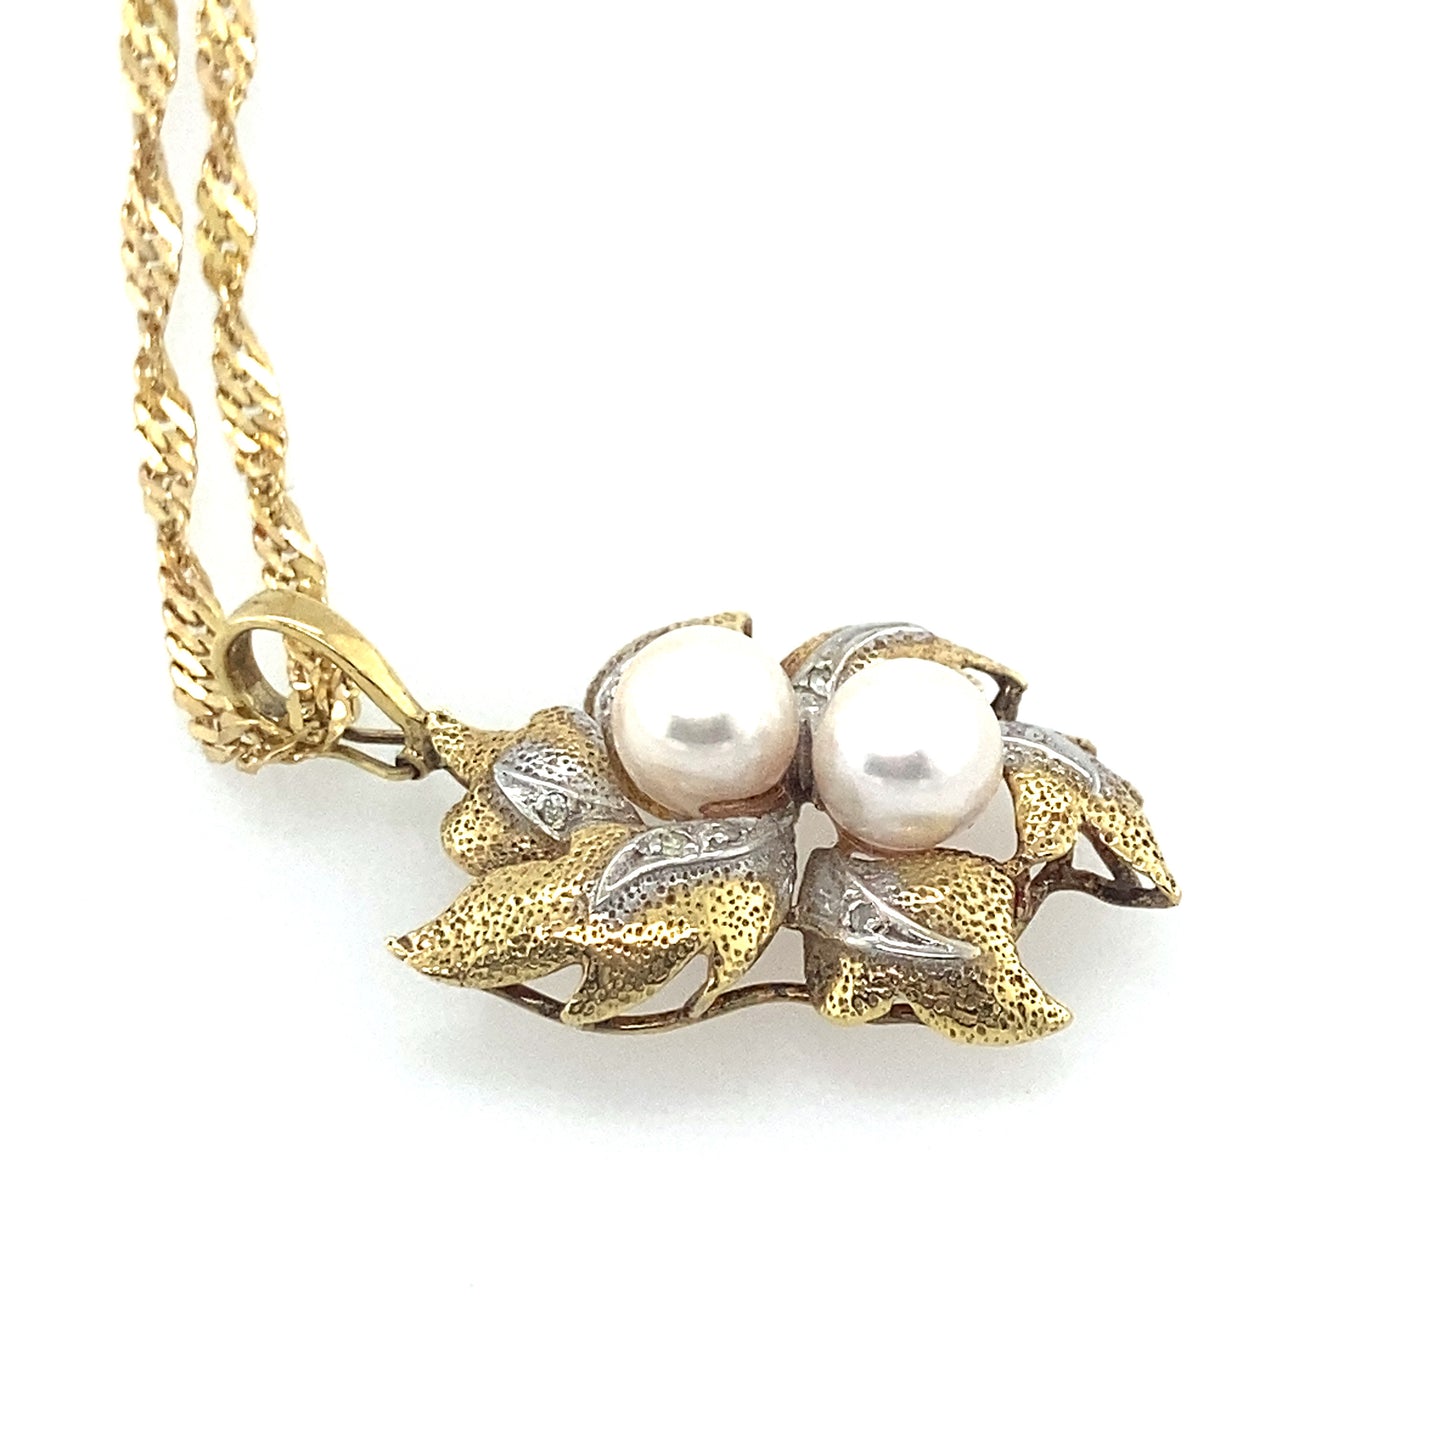 14k yellow and white gold pendant with 2 pc fresh water pearl. Chain is 14k yellow gold 20 inch.